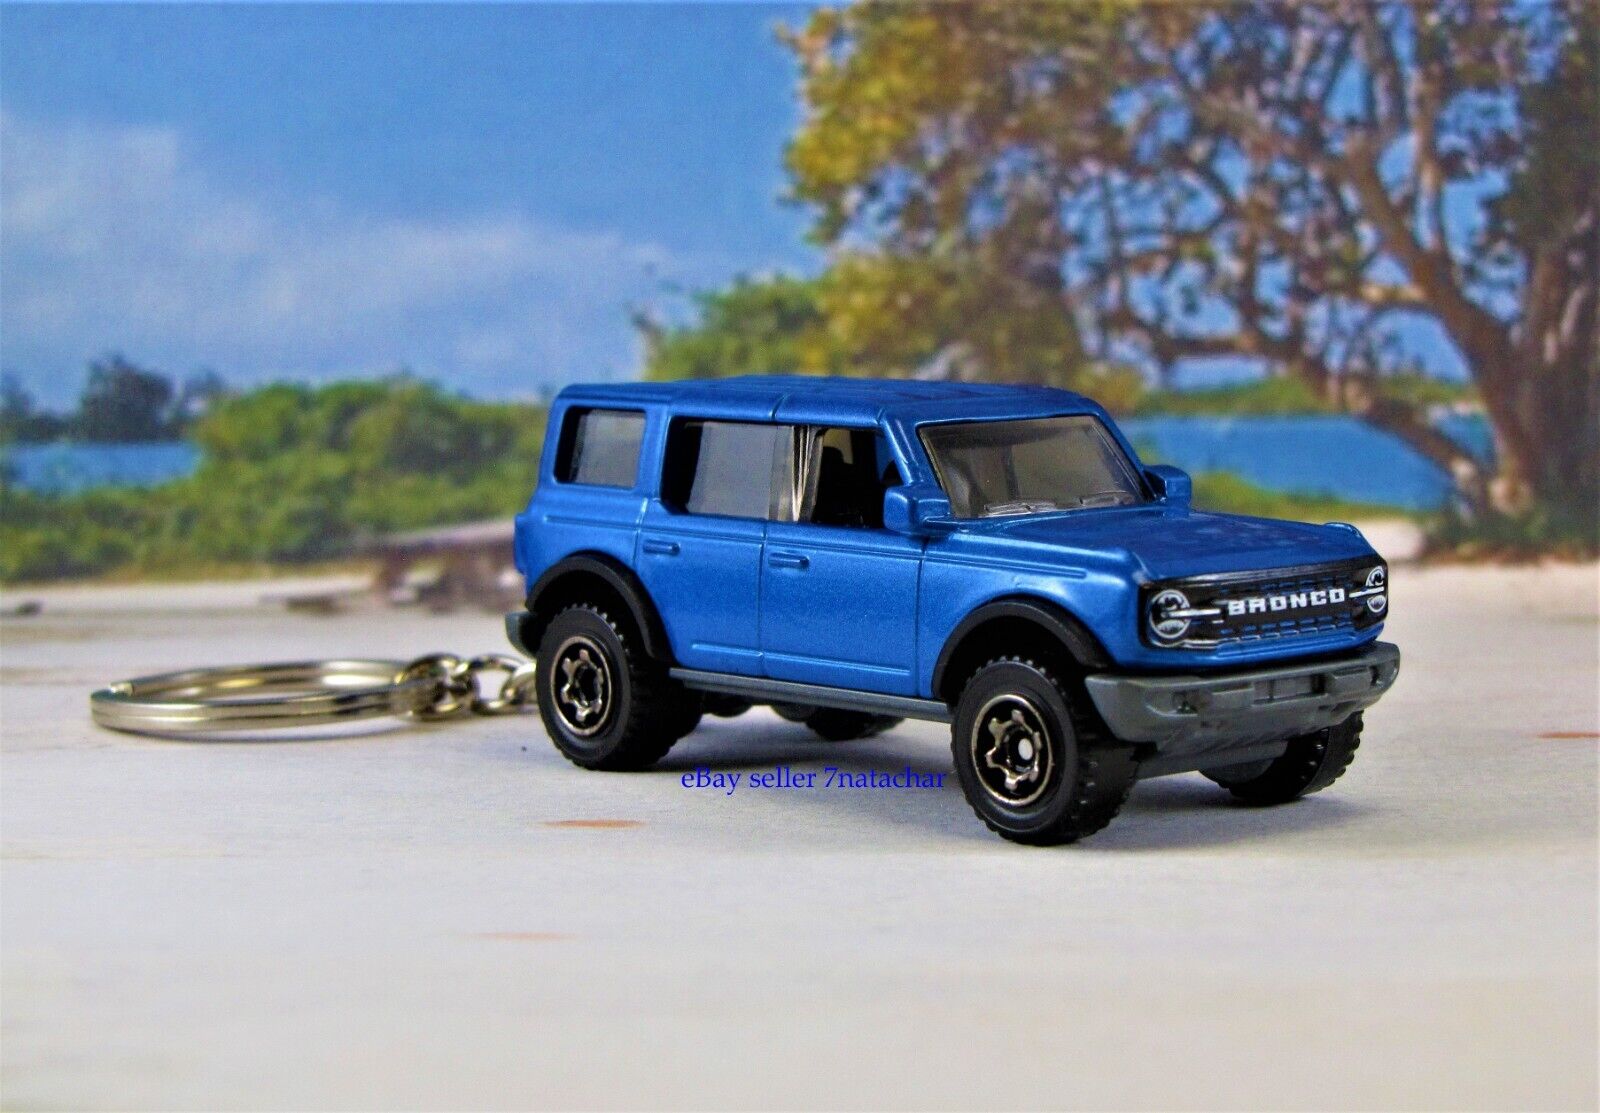 2021 - 2024 Ford Bronco Key Ring Keychain Fob Truck 3D Novelty Gift Blue B